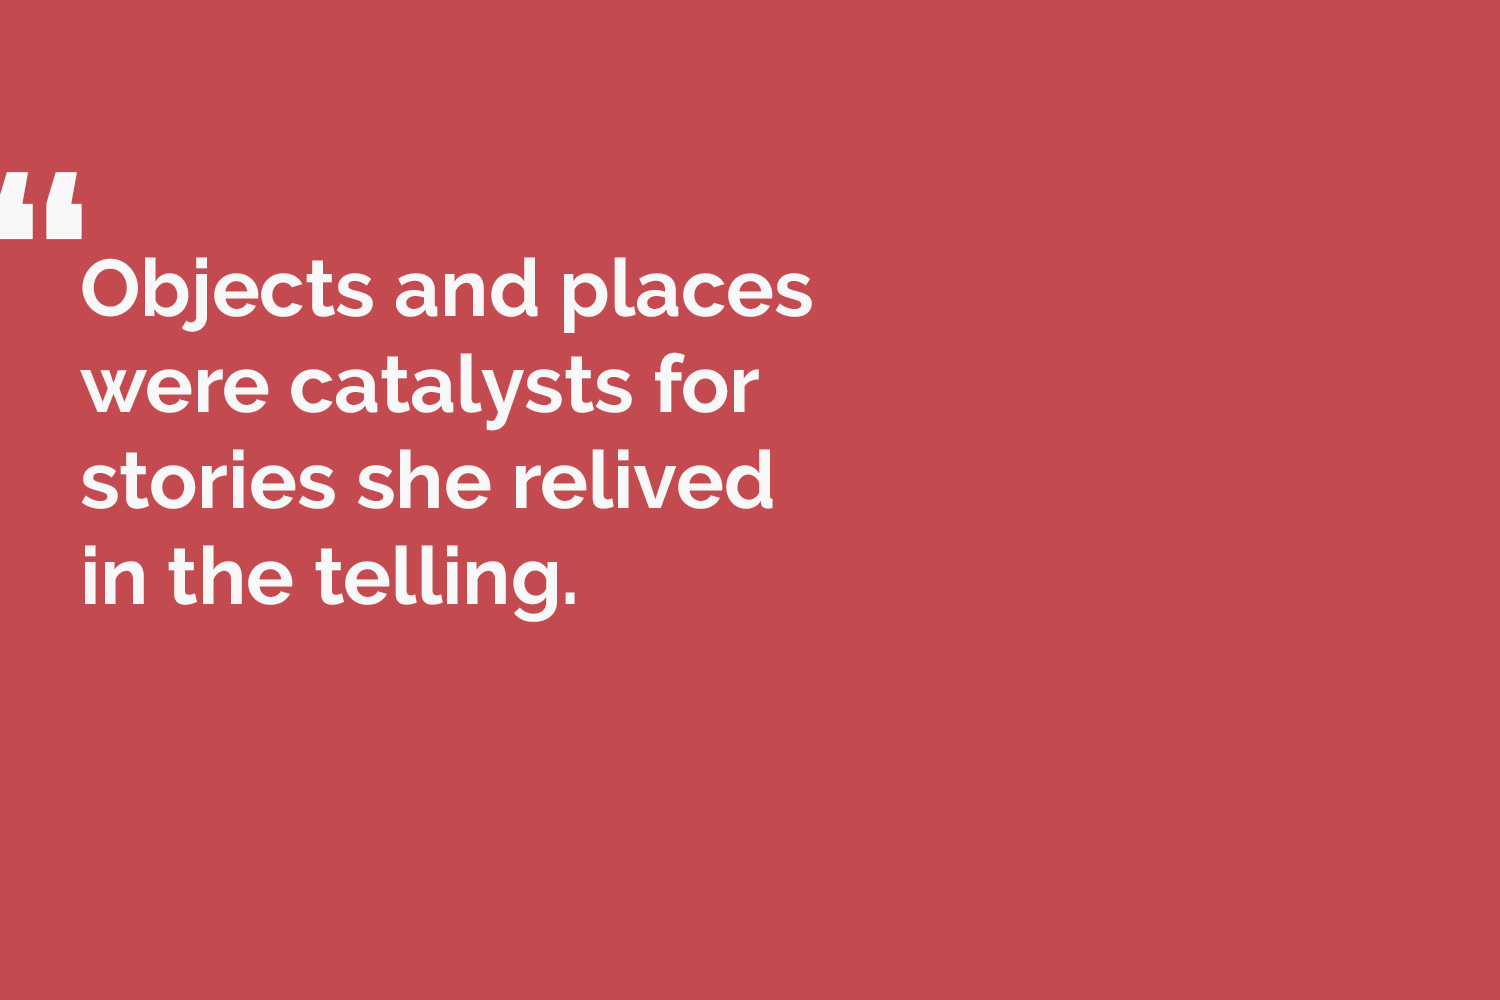 quote card reads: Objects and places were catalysts for stories she relived in the telling.